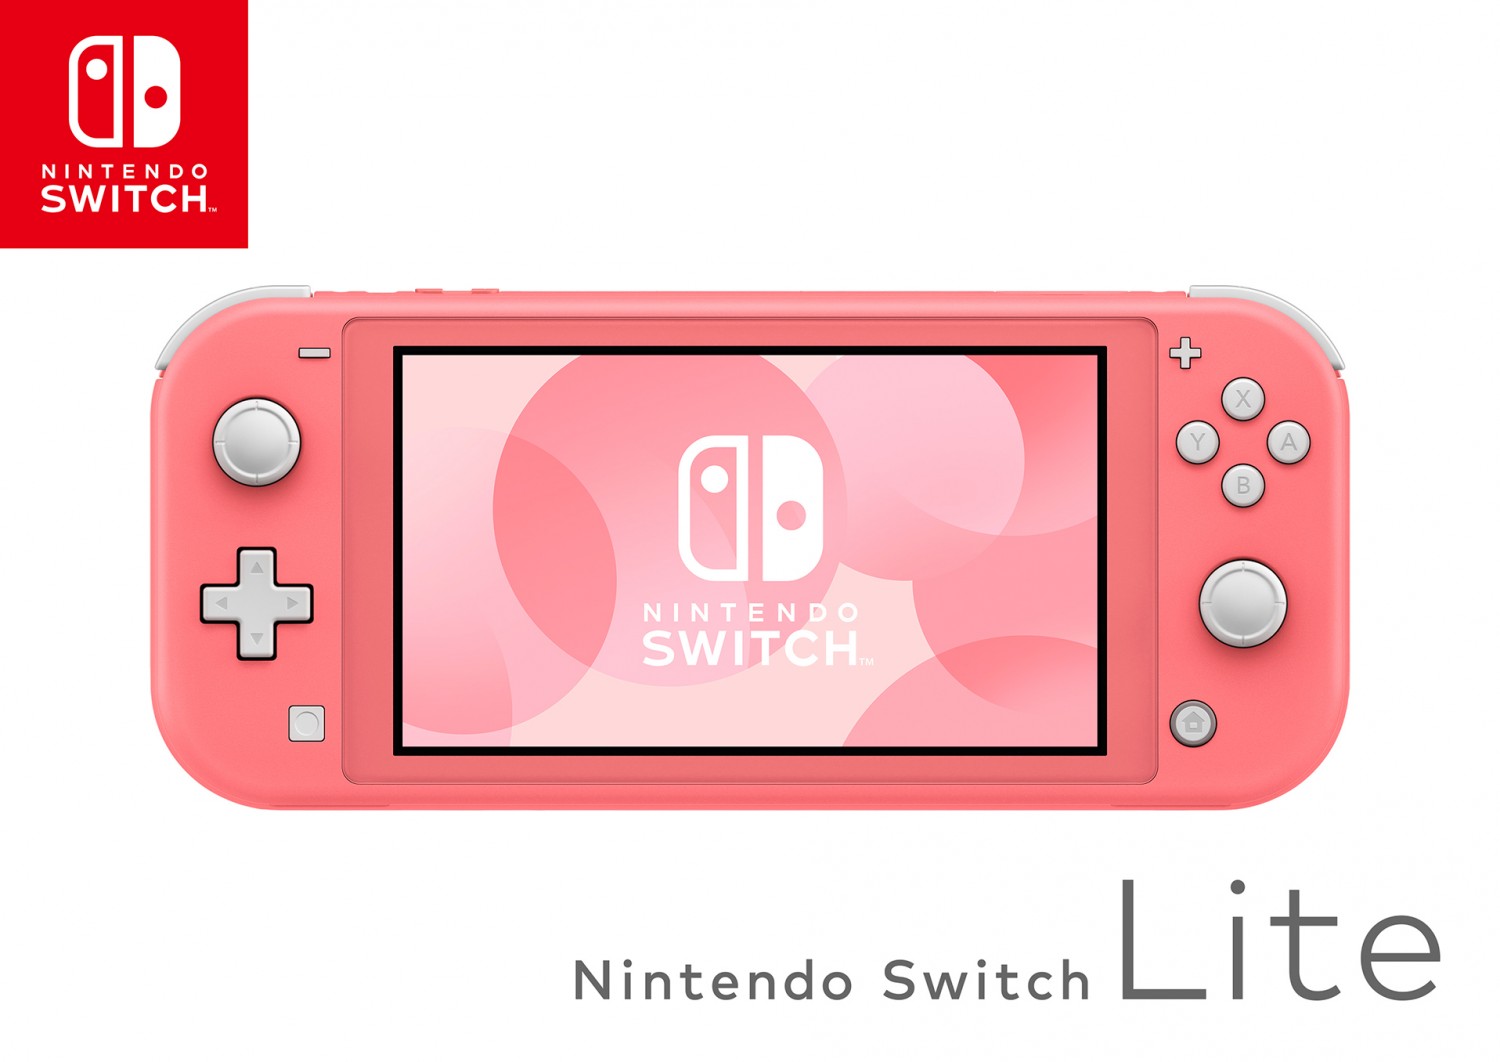 Show Off Your Aesthetic With The New Vibrant Coral Nintendo Switch Lite